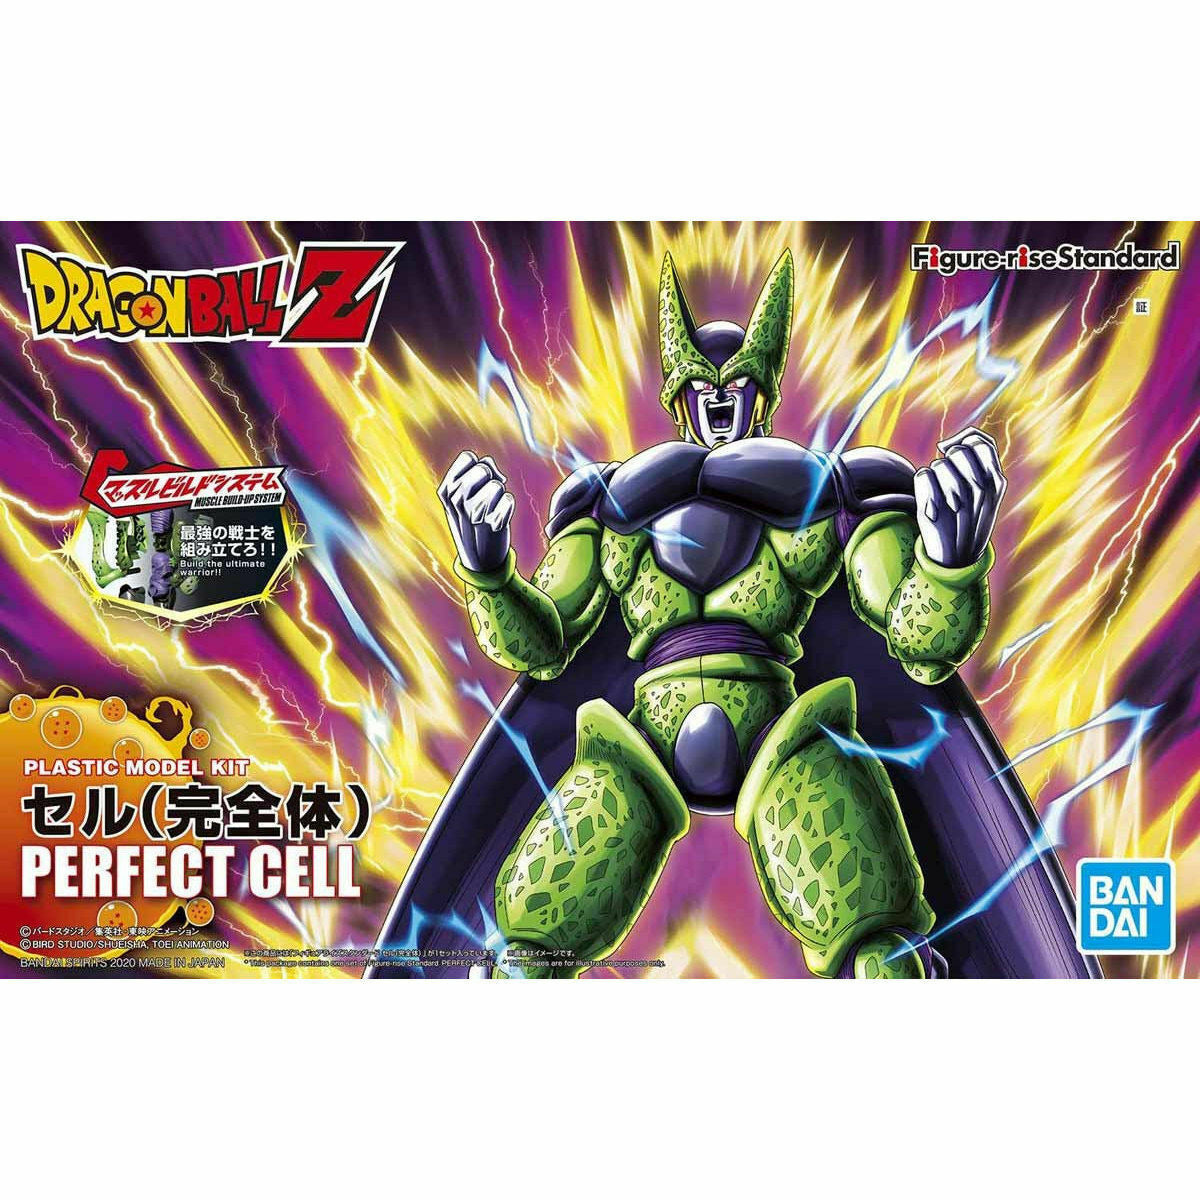 Perfect Cell - Figure-rise Standard #5058215 Dragon Ball Action Figure Model Kit by Bandai